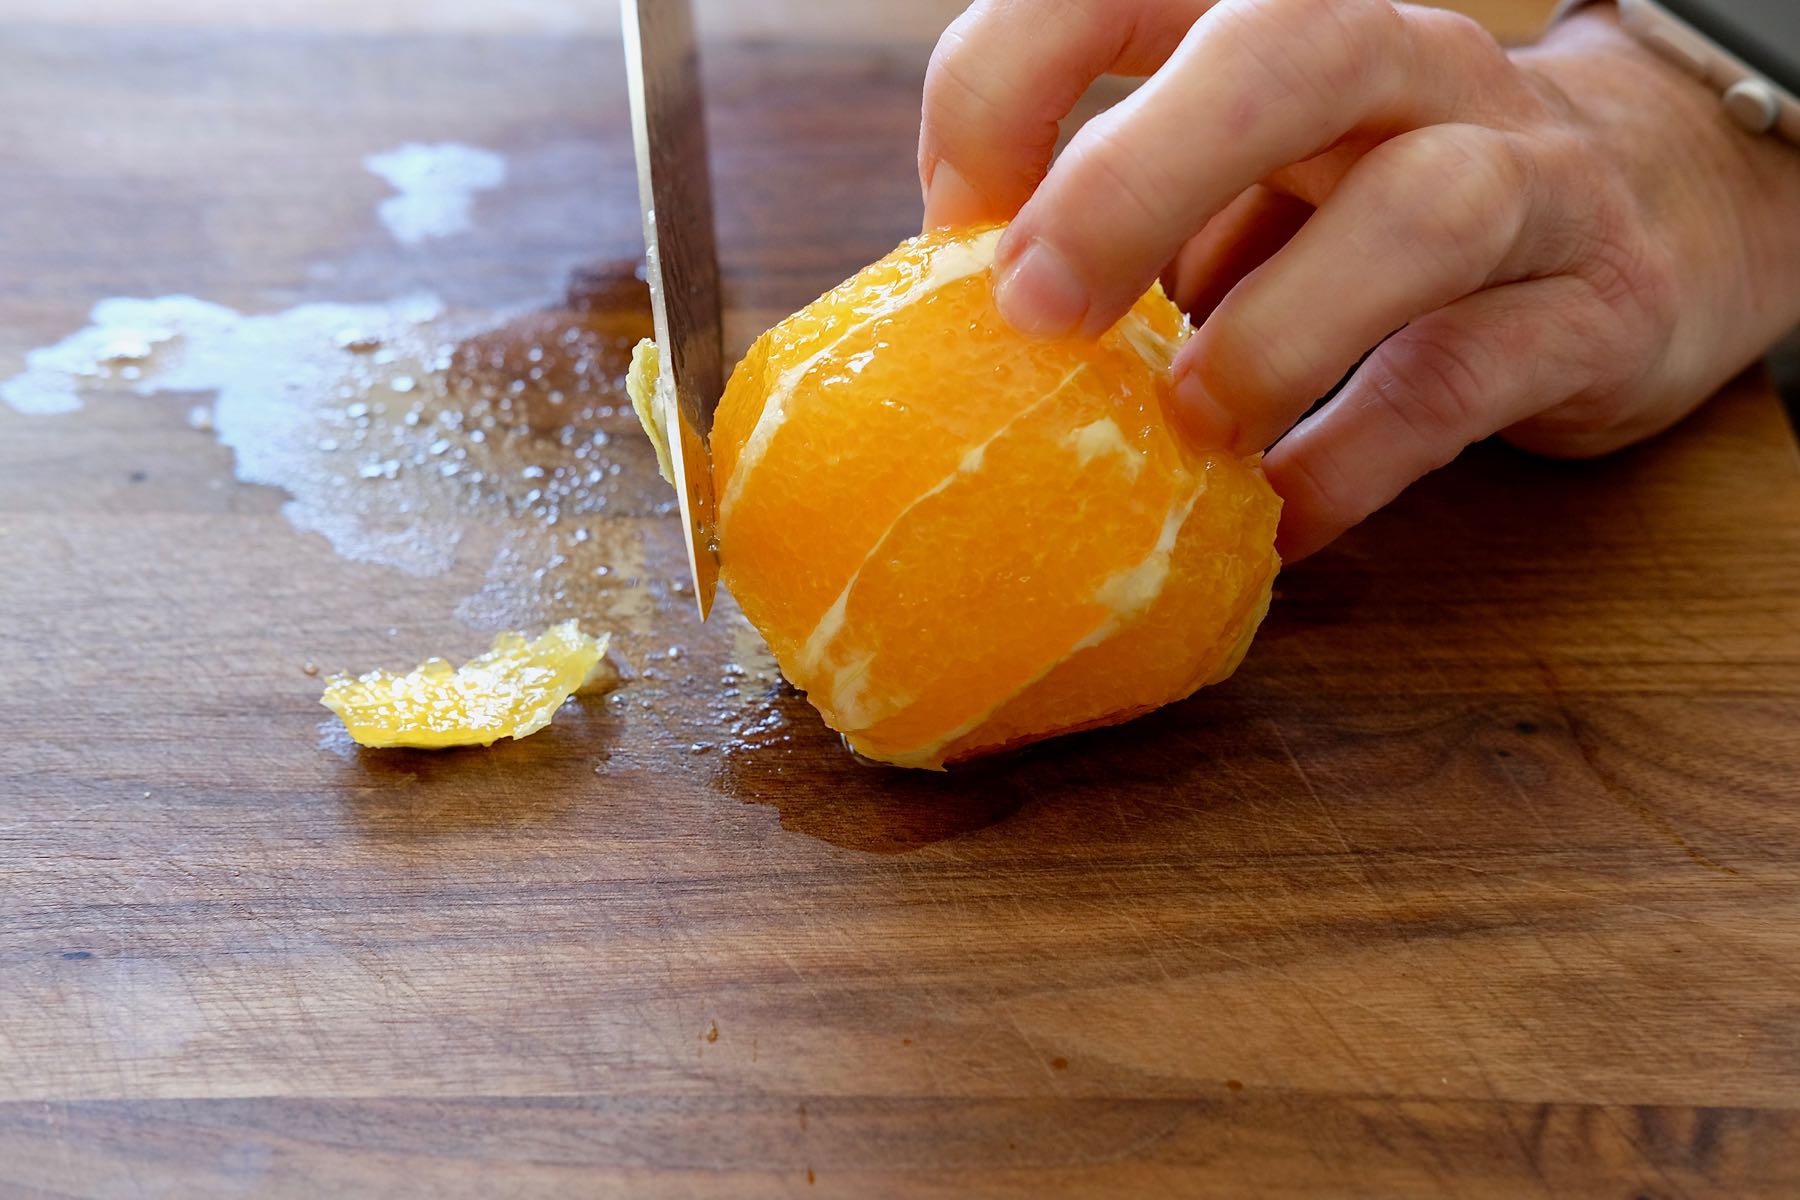 Trimming rind and pith away from orange on cutting board.